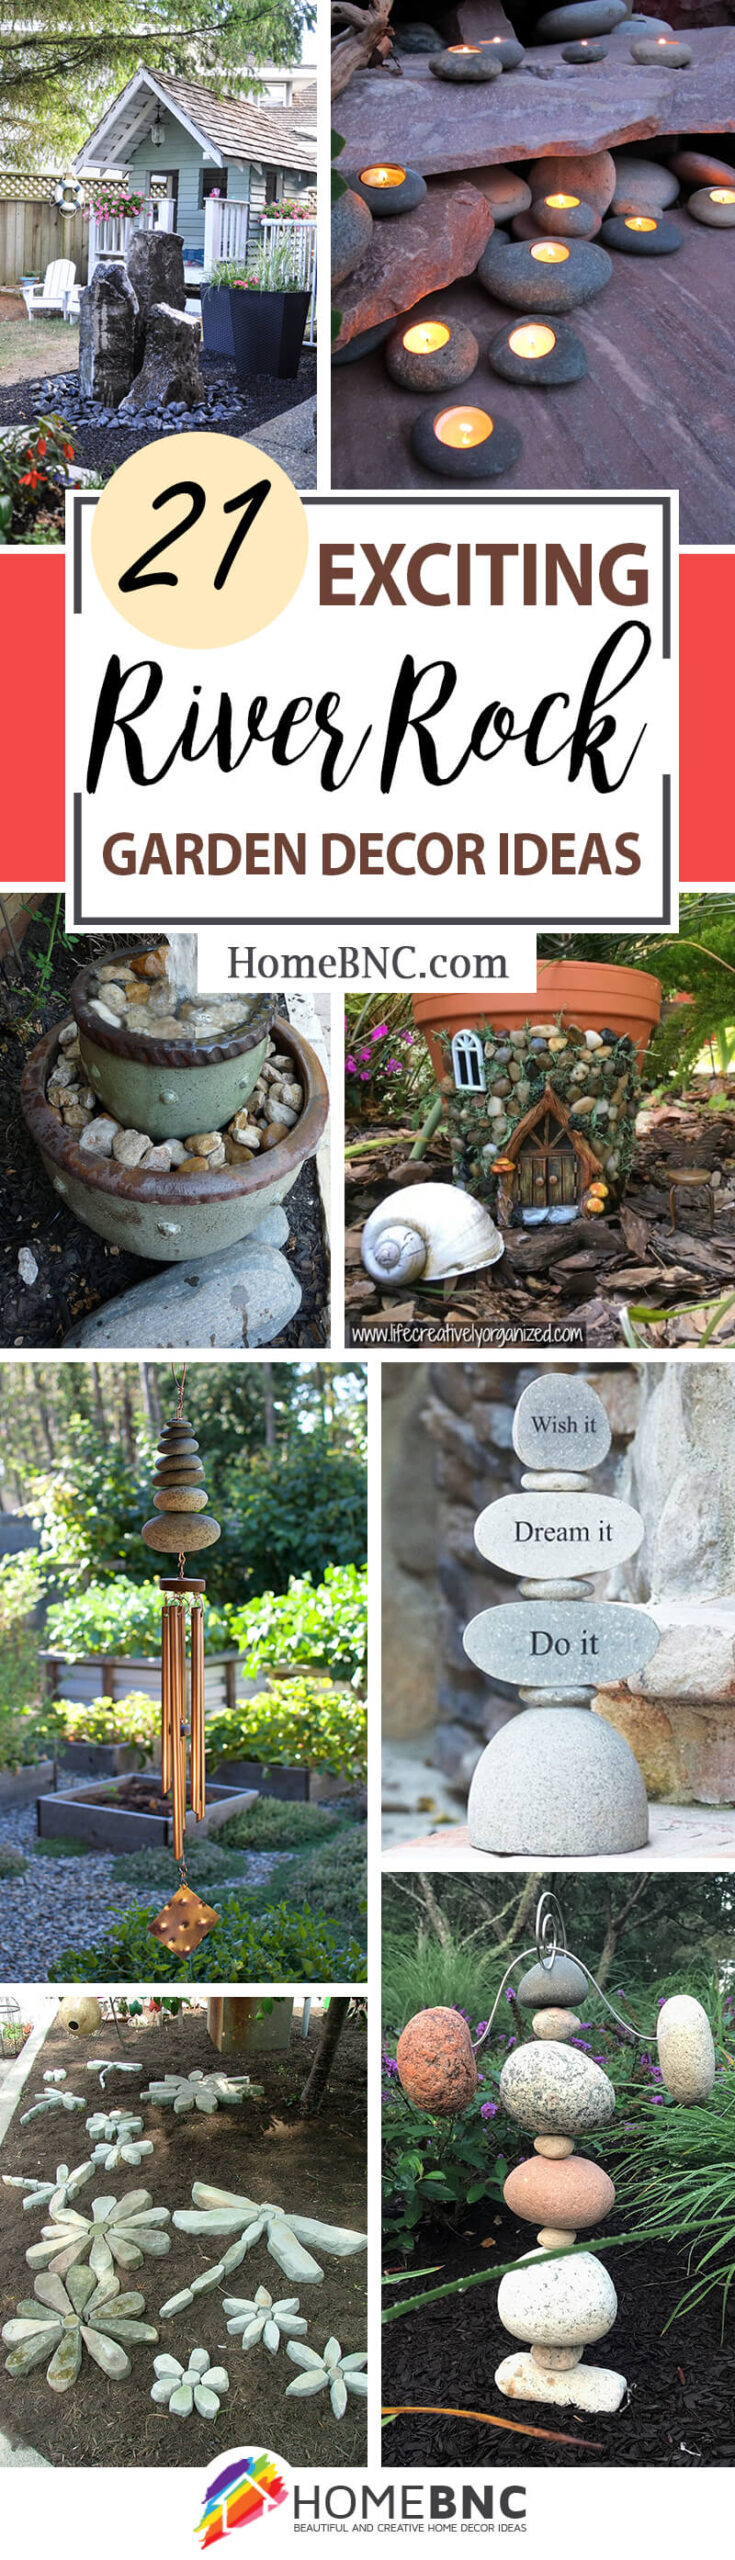 River Rock and Stone Garden Decorating Ideas